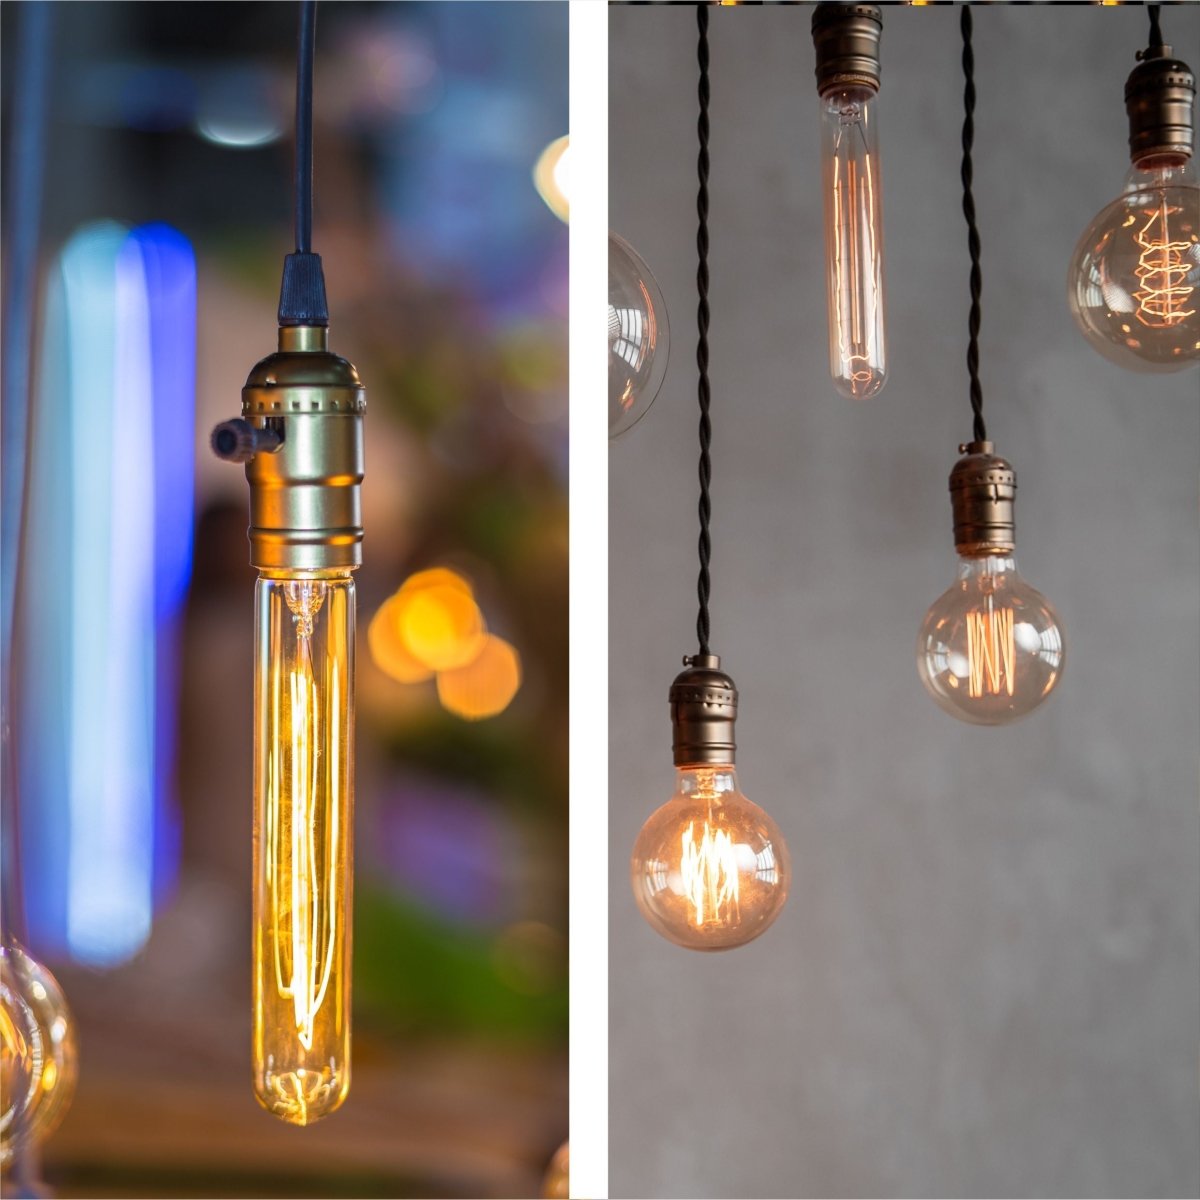 More usage for LED Dimmable Filament Bulb T30 Tubular E27 Edison Screw 4W 240lm 300mm Warm White 2400K Amber Pack of 4 | TEKLED 583-150585